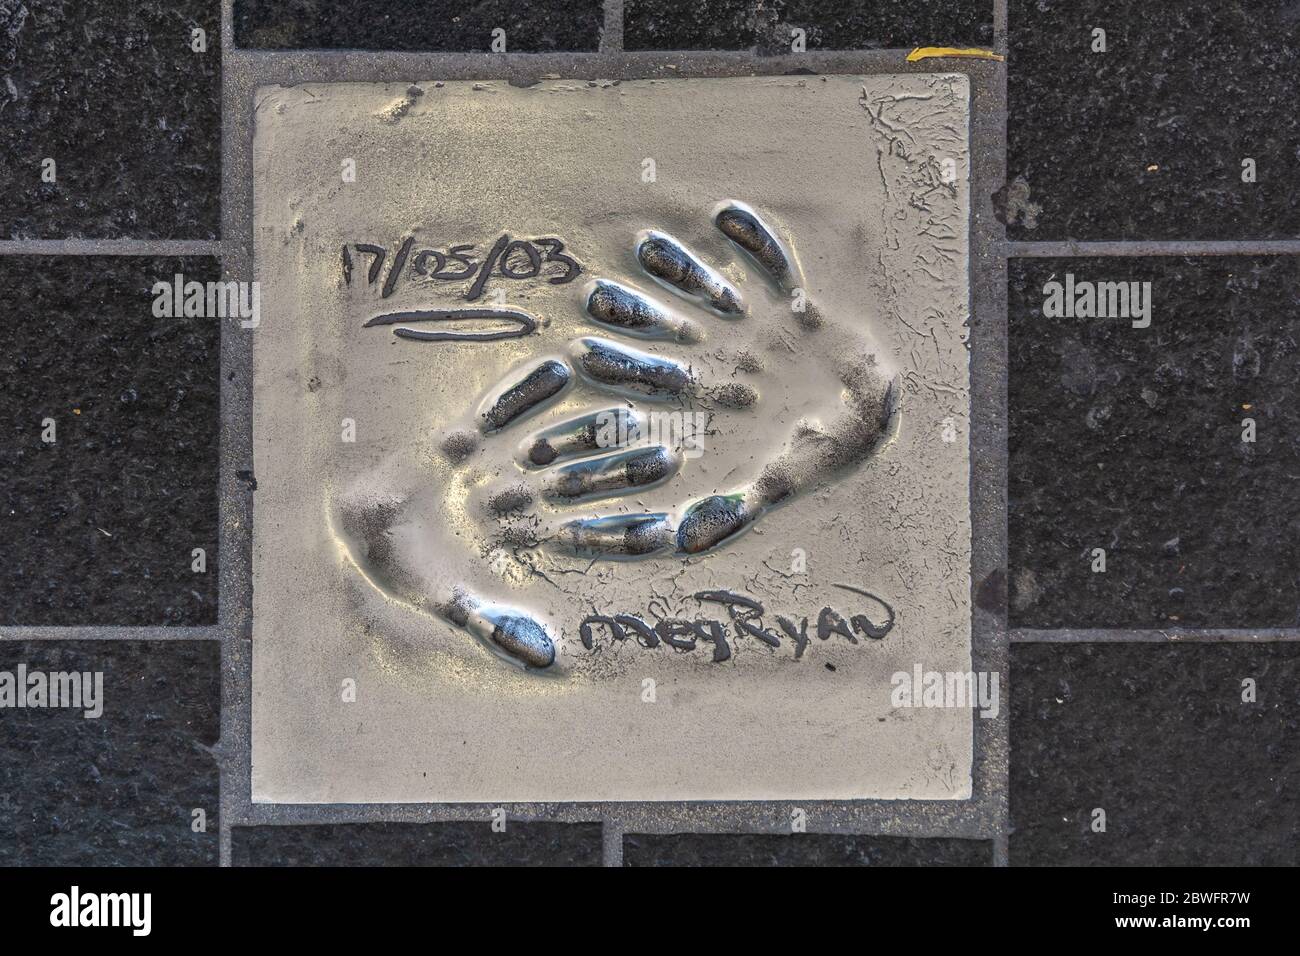 Cannes, France - June 12, 2019 : Handprints of celebrities. The imprint of the hand of a famous American actress Meg Ryan. Stock Photo